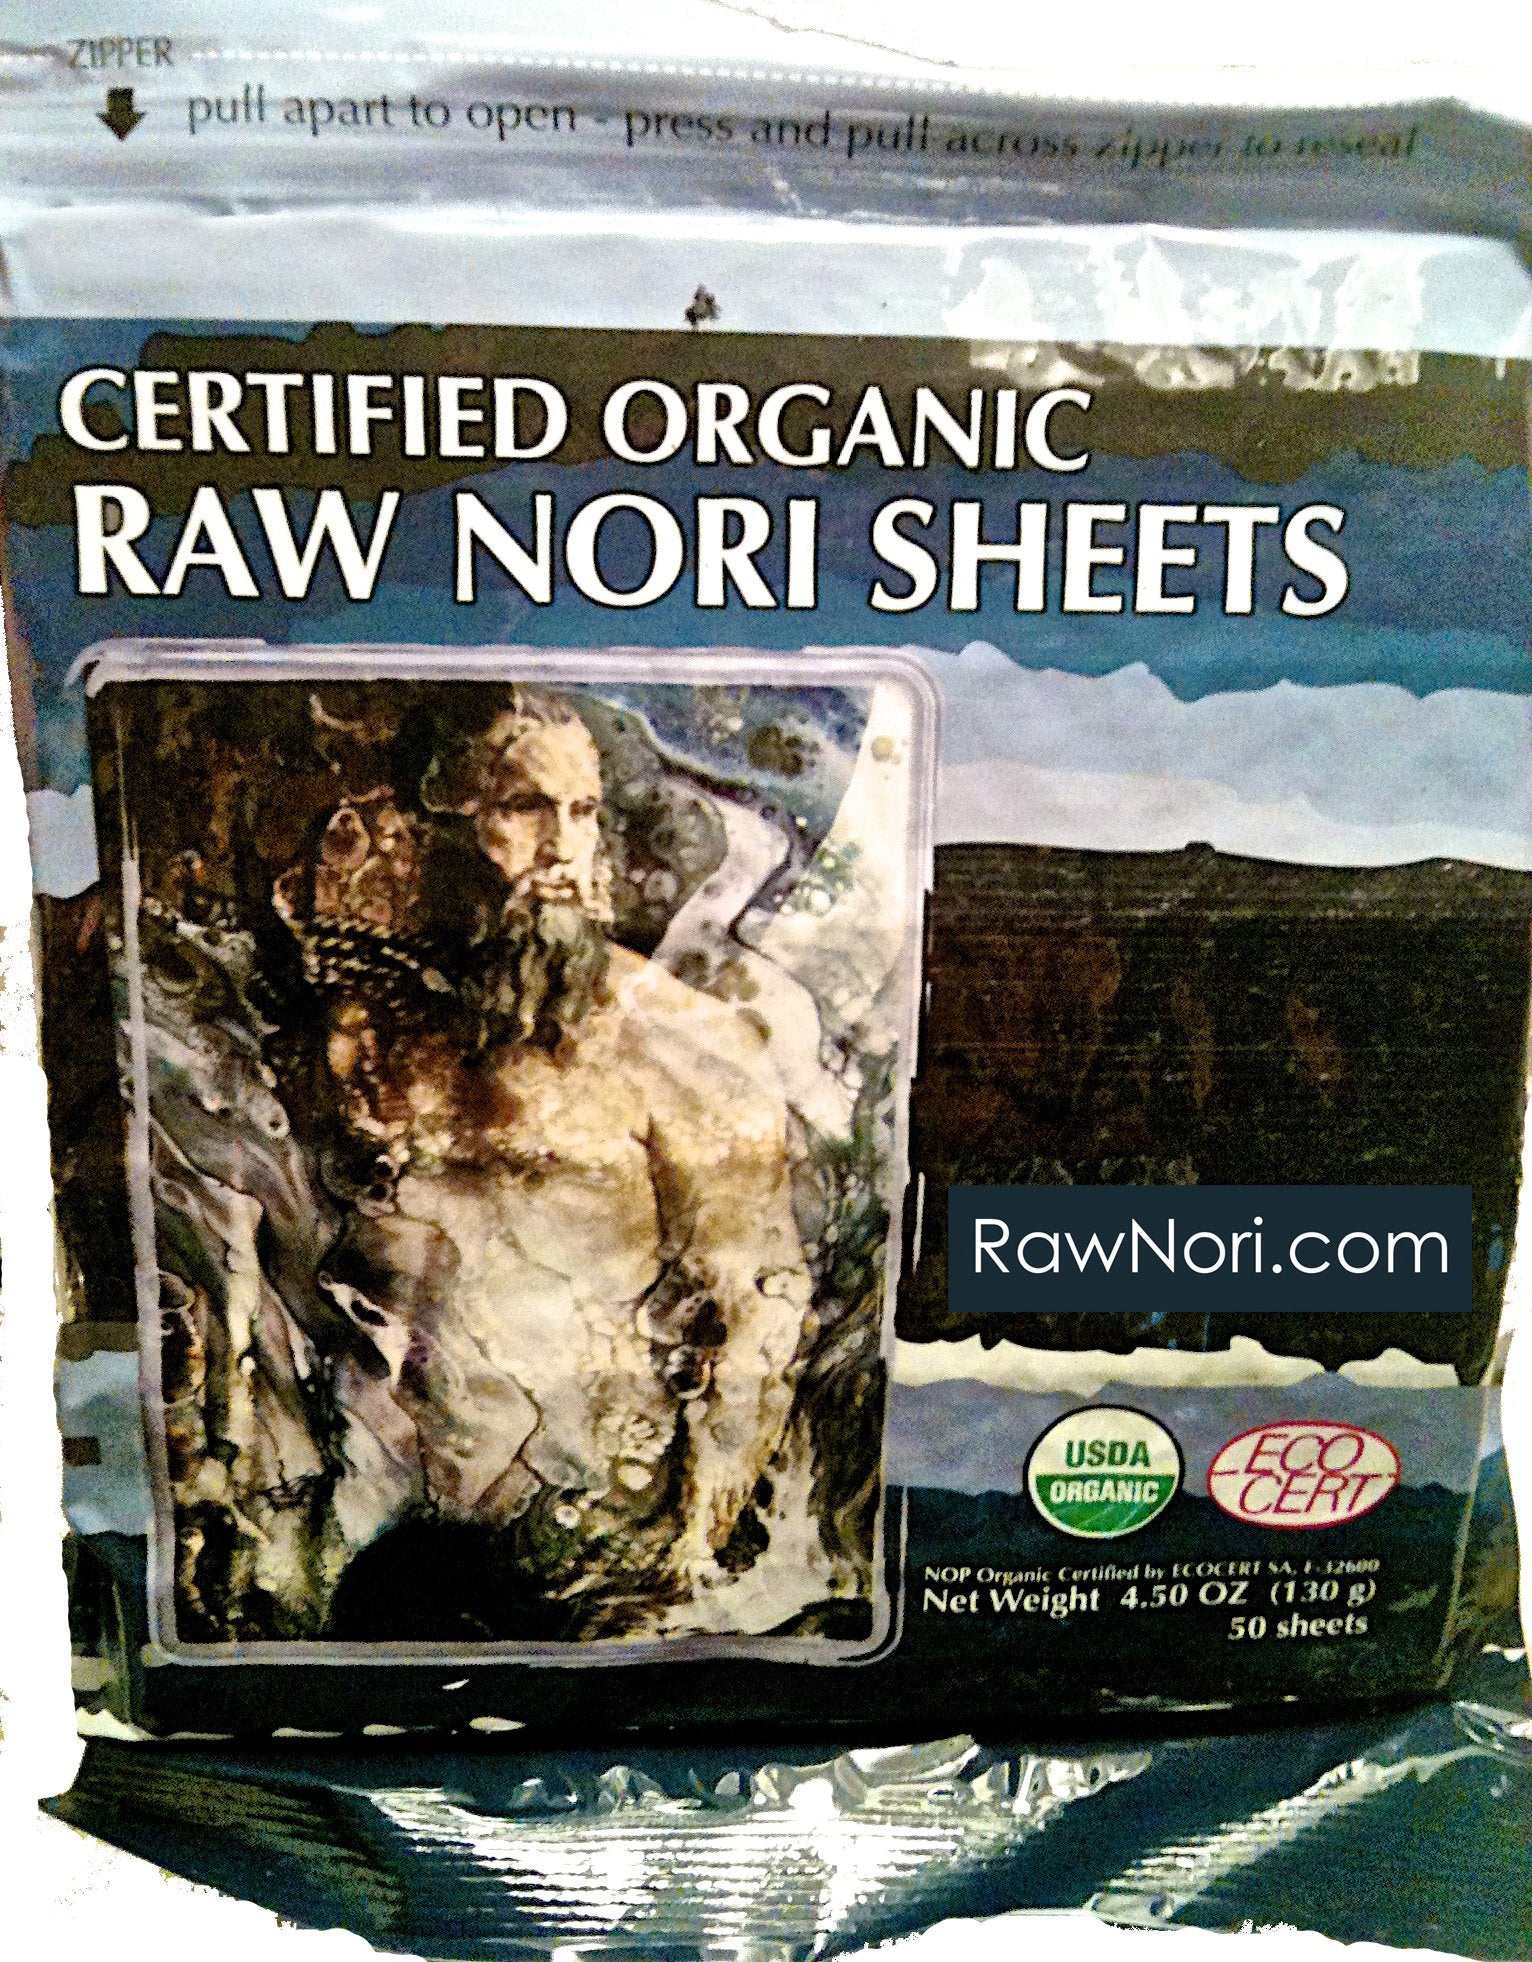 Raw Organic Nori Sheets 50 qty Pack! - Certified Vegan, Raw, Kosher Sushi Wrap Papers - Premium Unheated, Un Cooked, Untoasted, Dried - RAWFOOD